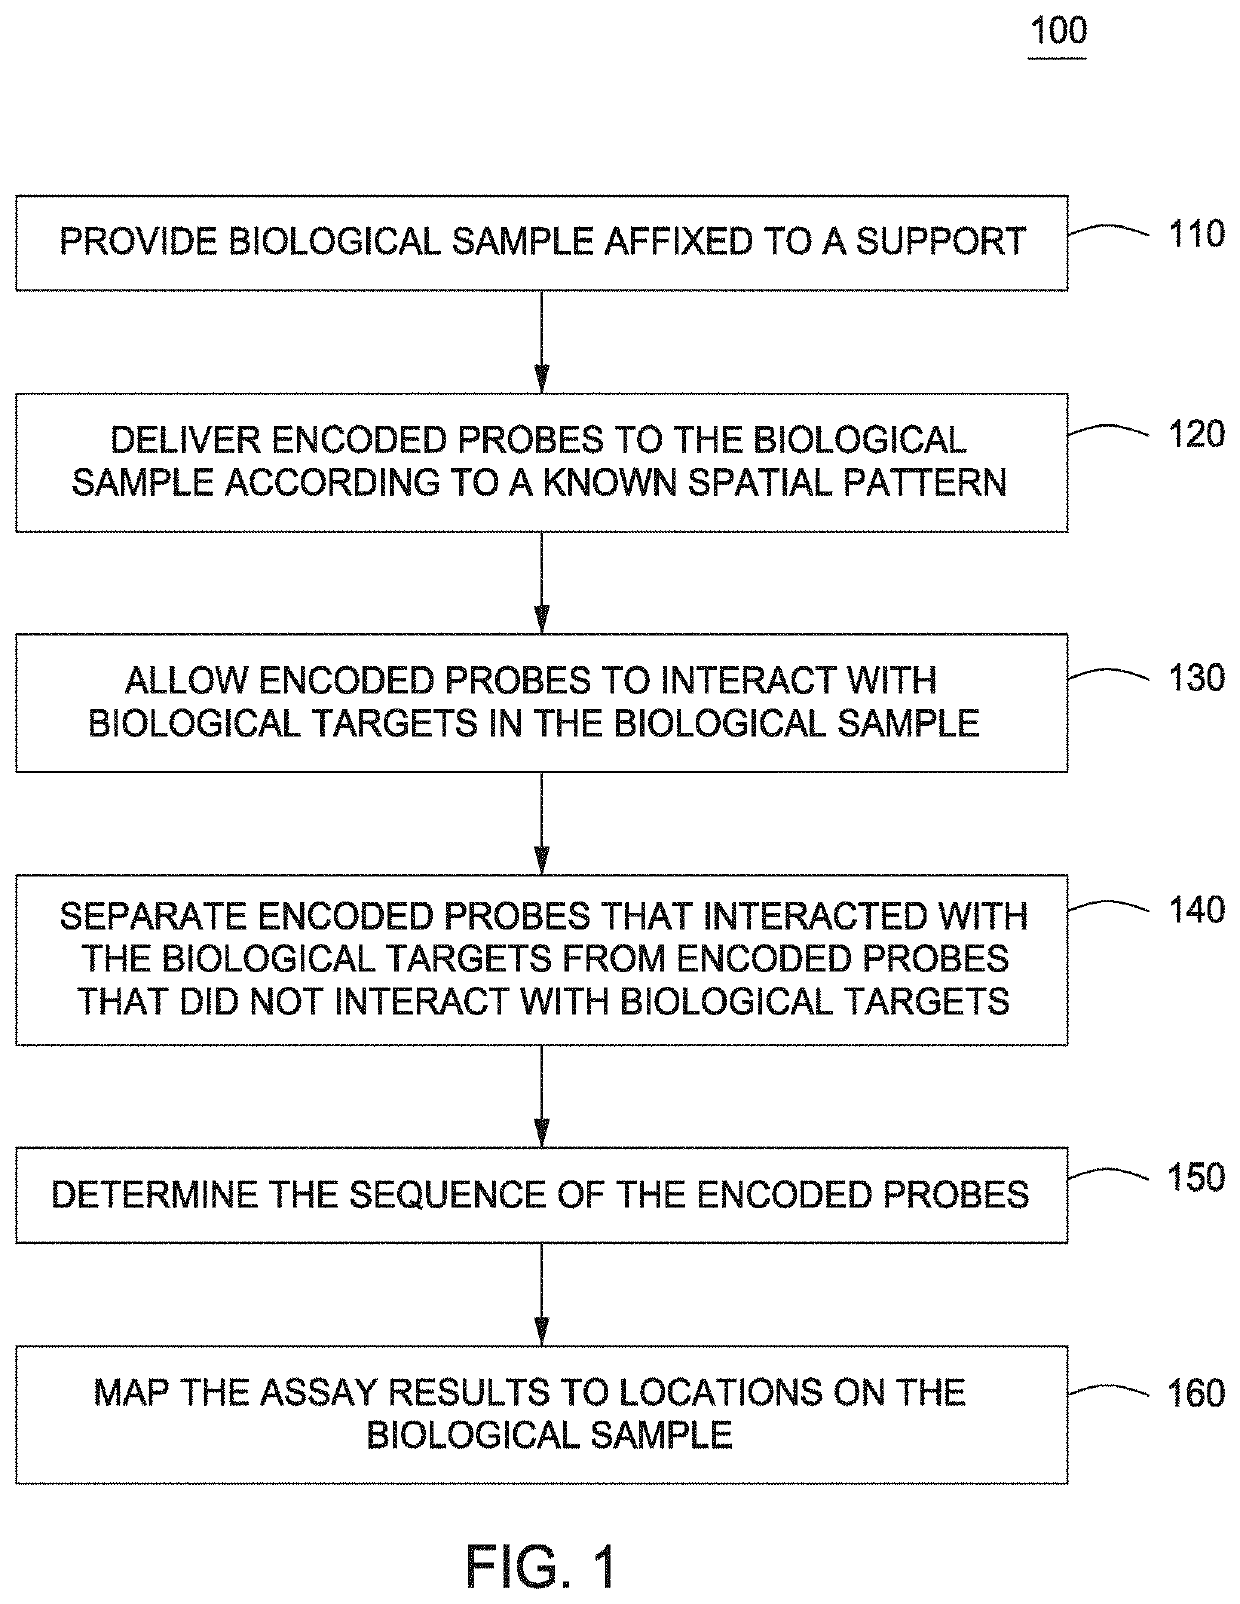 Spatially Encoded Biological Assays